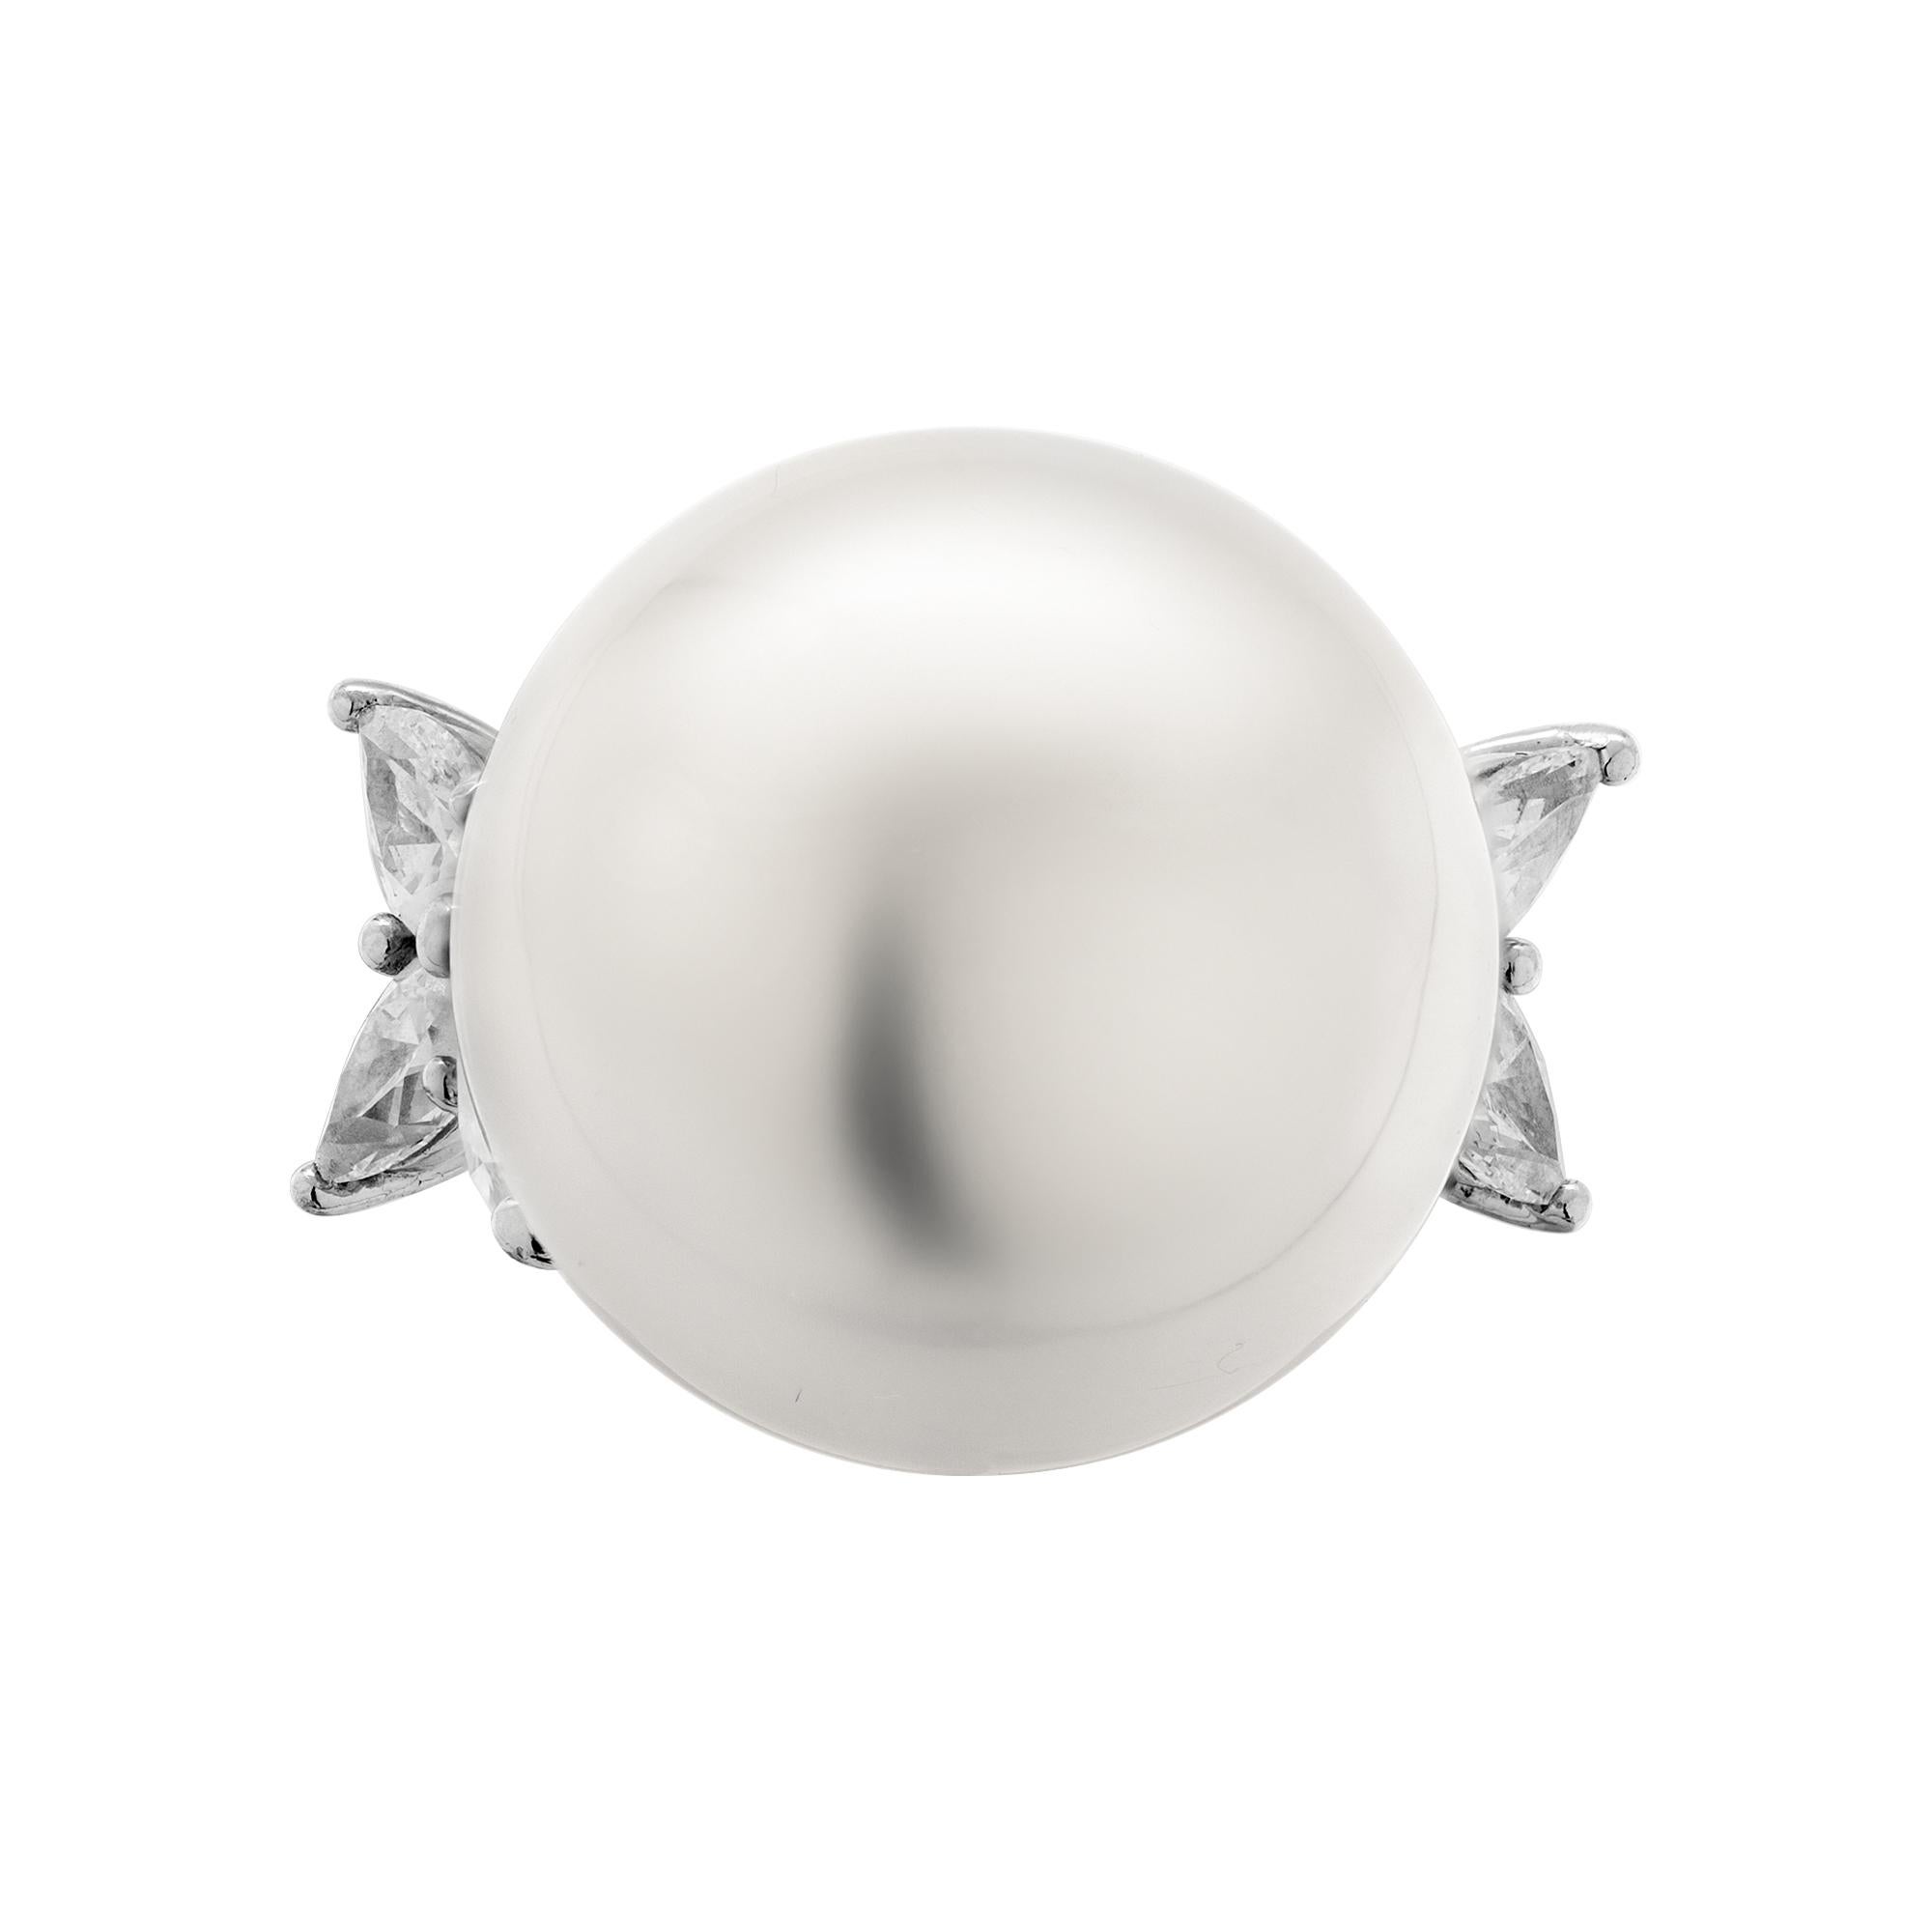 Harry Winston Wisdom Of Pearl Ring

Mounted is platinum with almost 3ct of diamonds and South Sea Pears 18.2mm - AAAA quality.

Size 5.25 (sizable)
GIA Certification 2215679453
Extremely Rare Ring - there was only a couple available, you will not